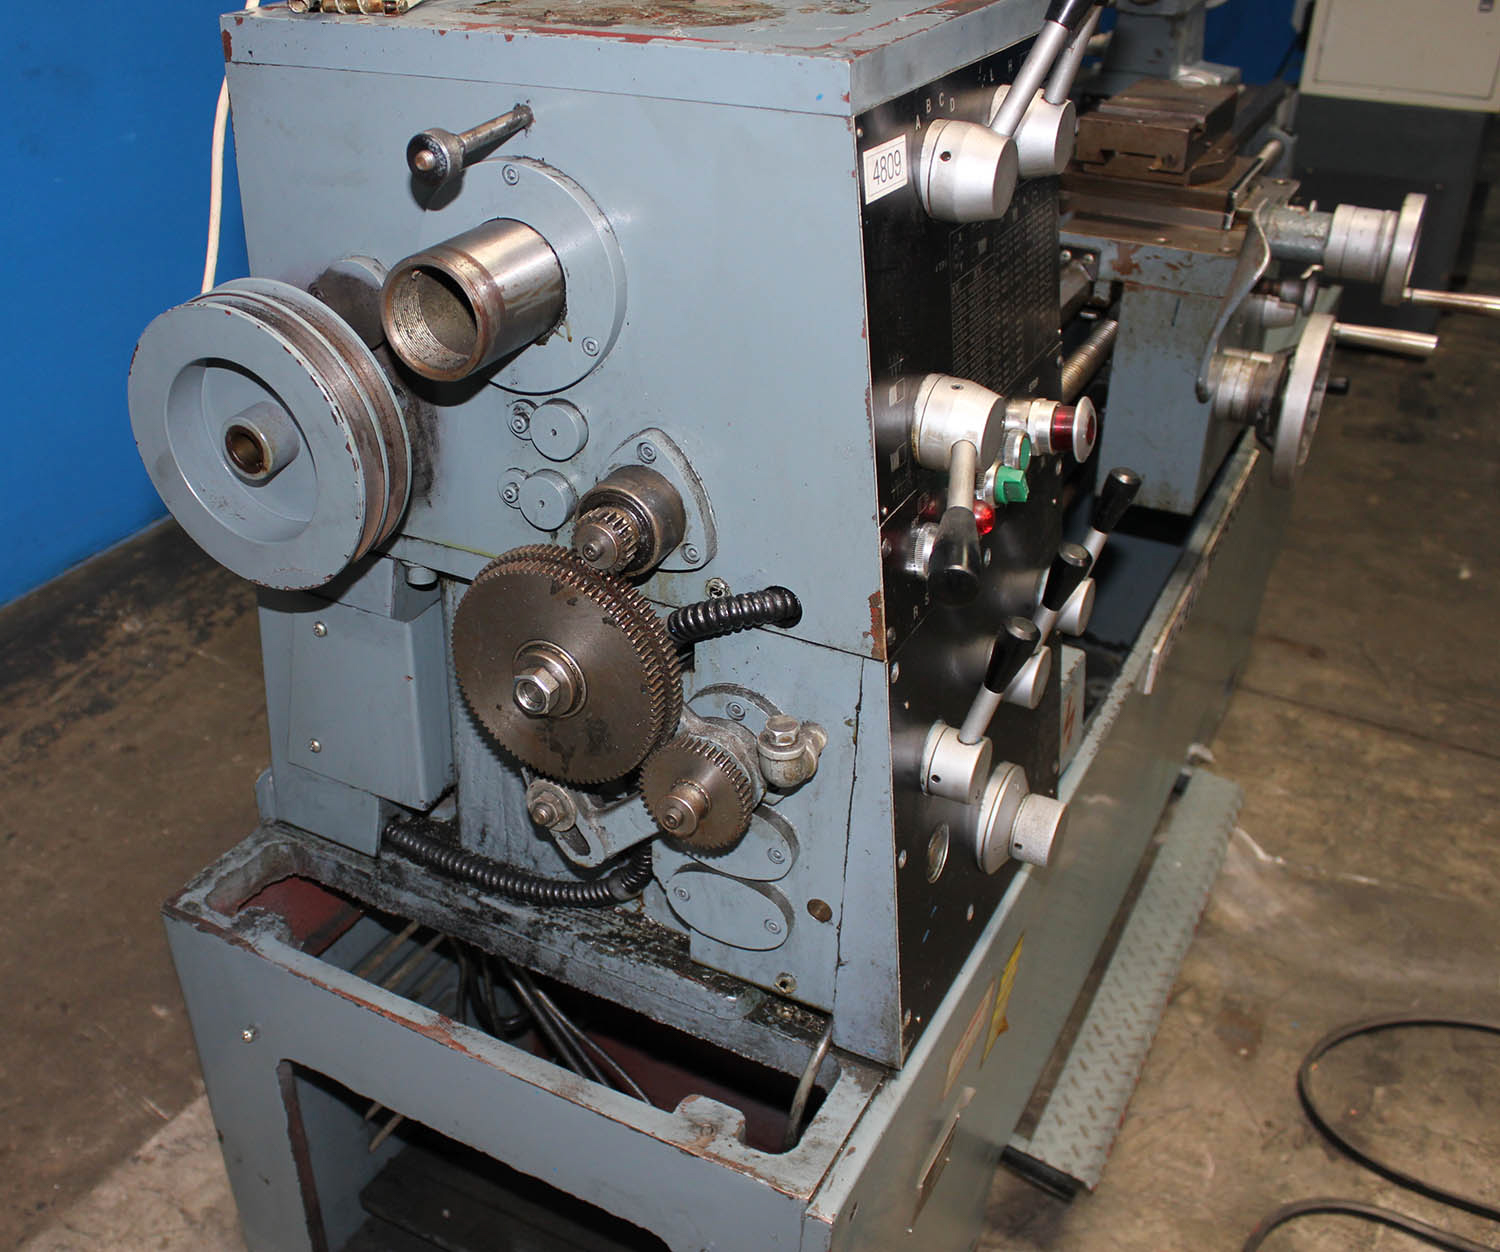 manual engine lathes for sale